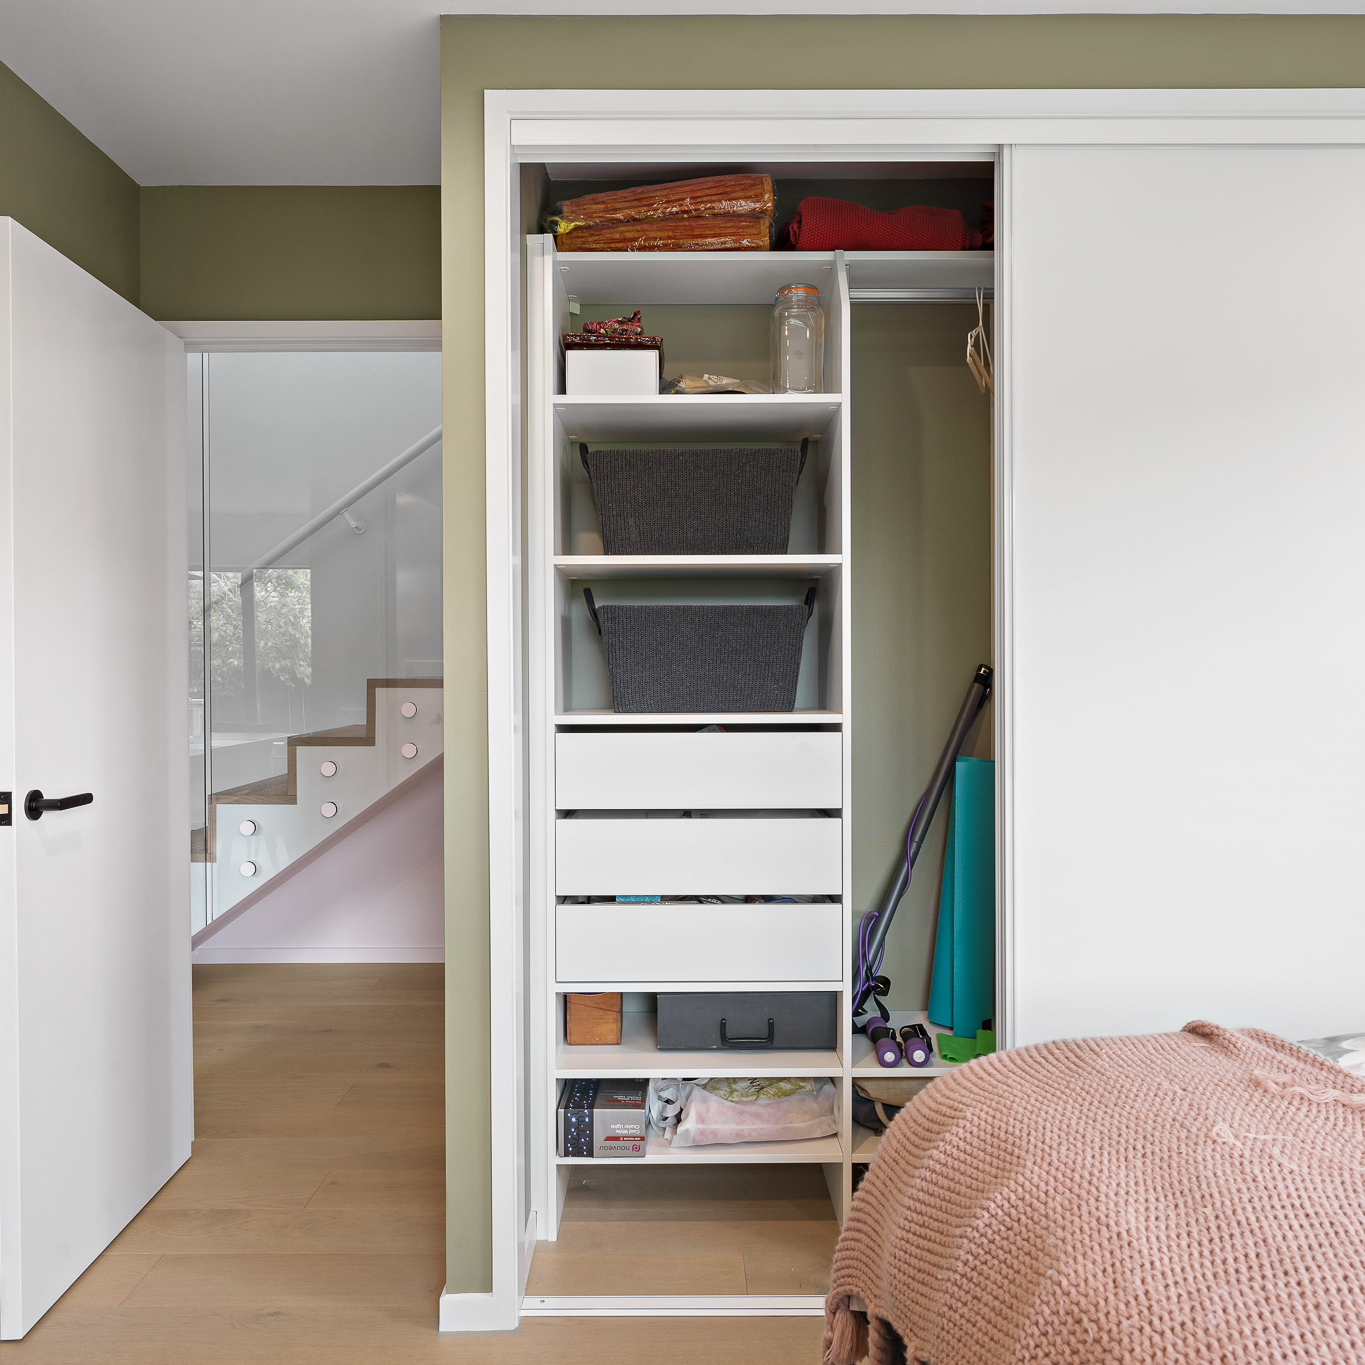 Bedroom showing White Aristo sliding wardrobe doors, open and you can see the Flex wardrobe organiser inside